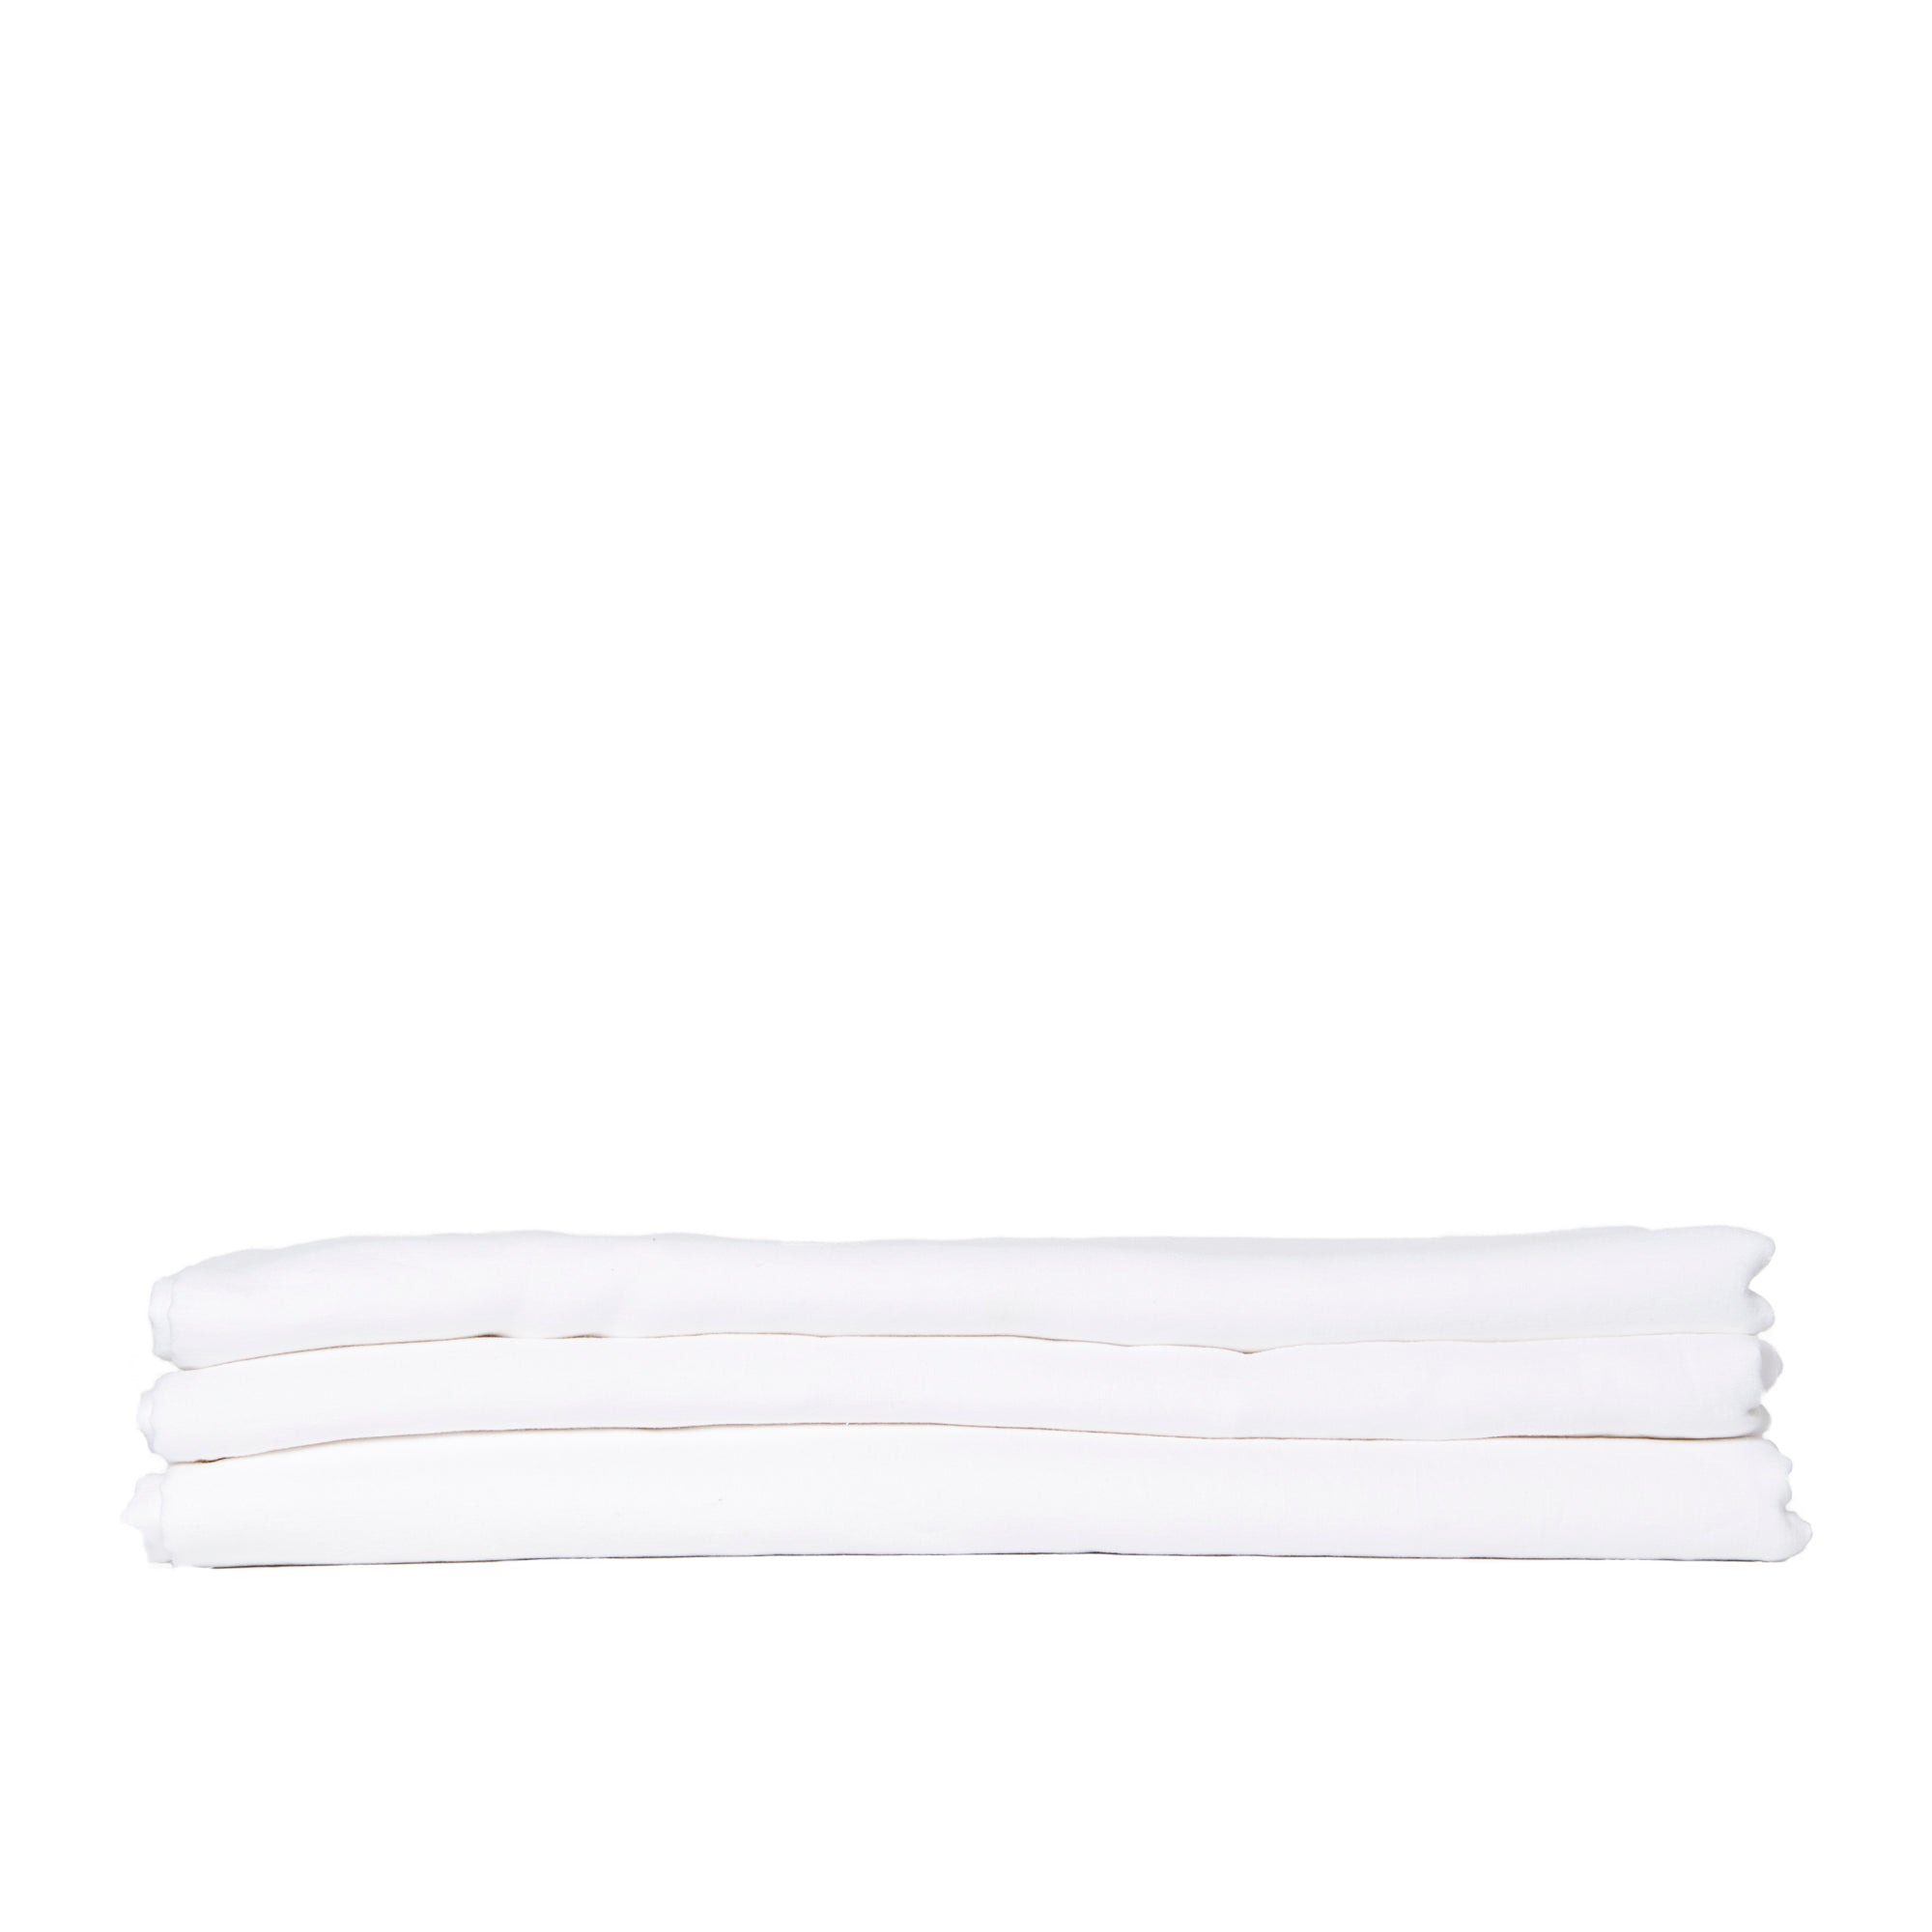 Pure French Linen white tablecloths